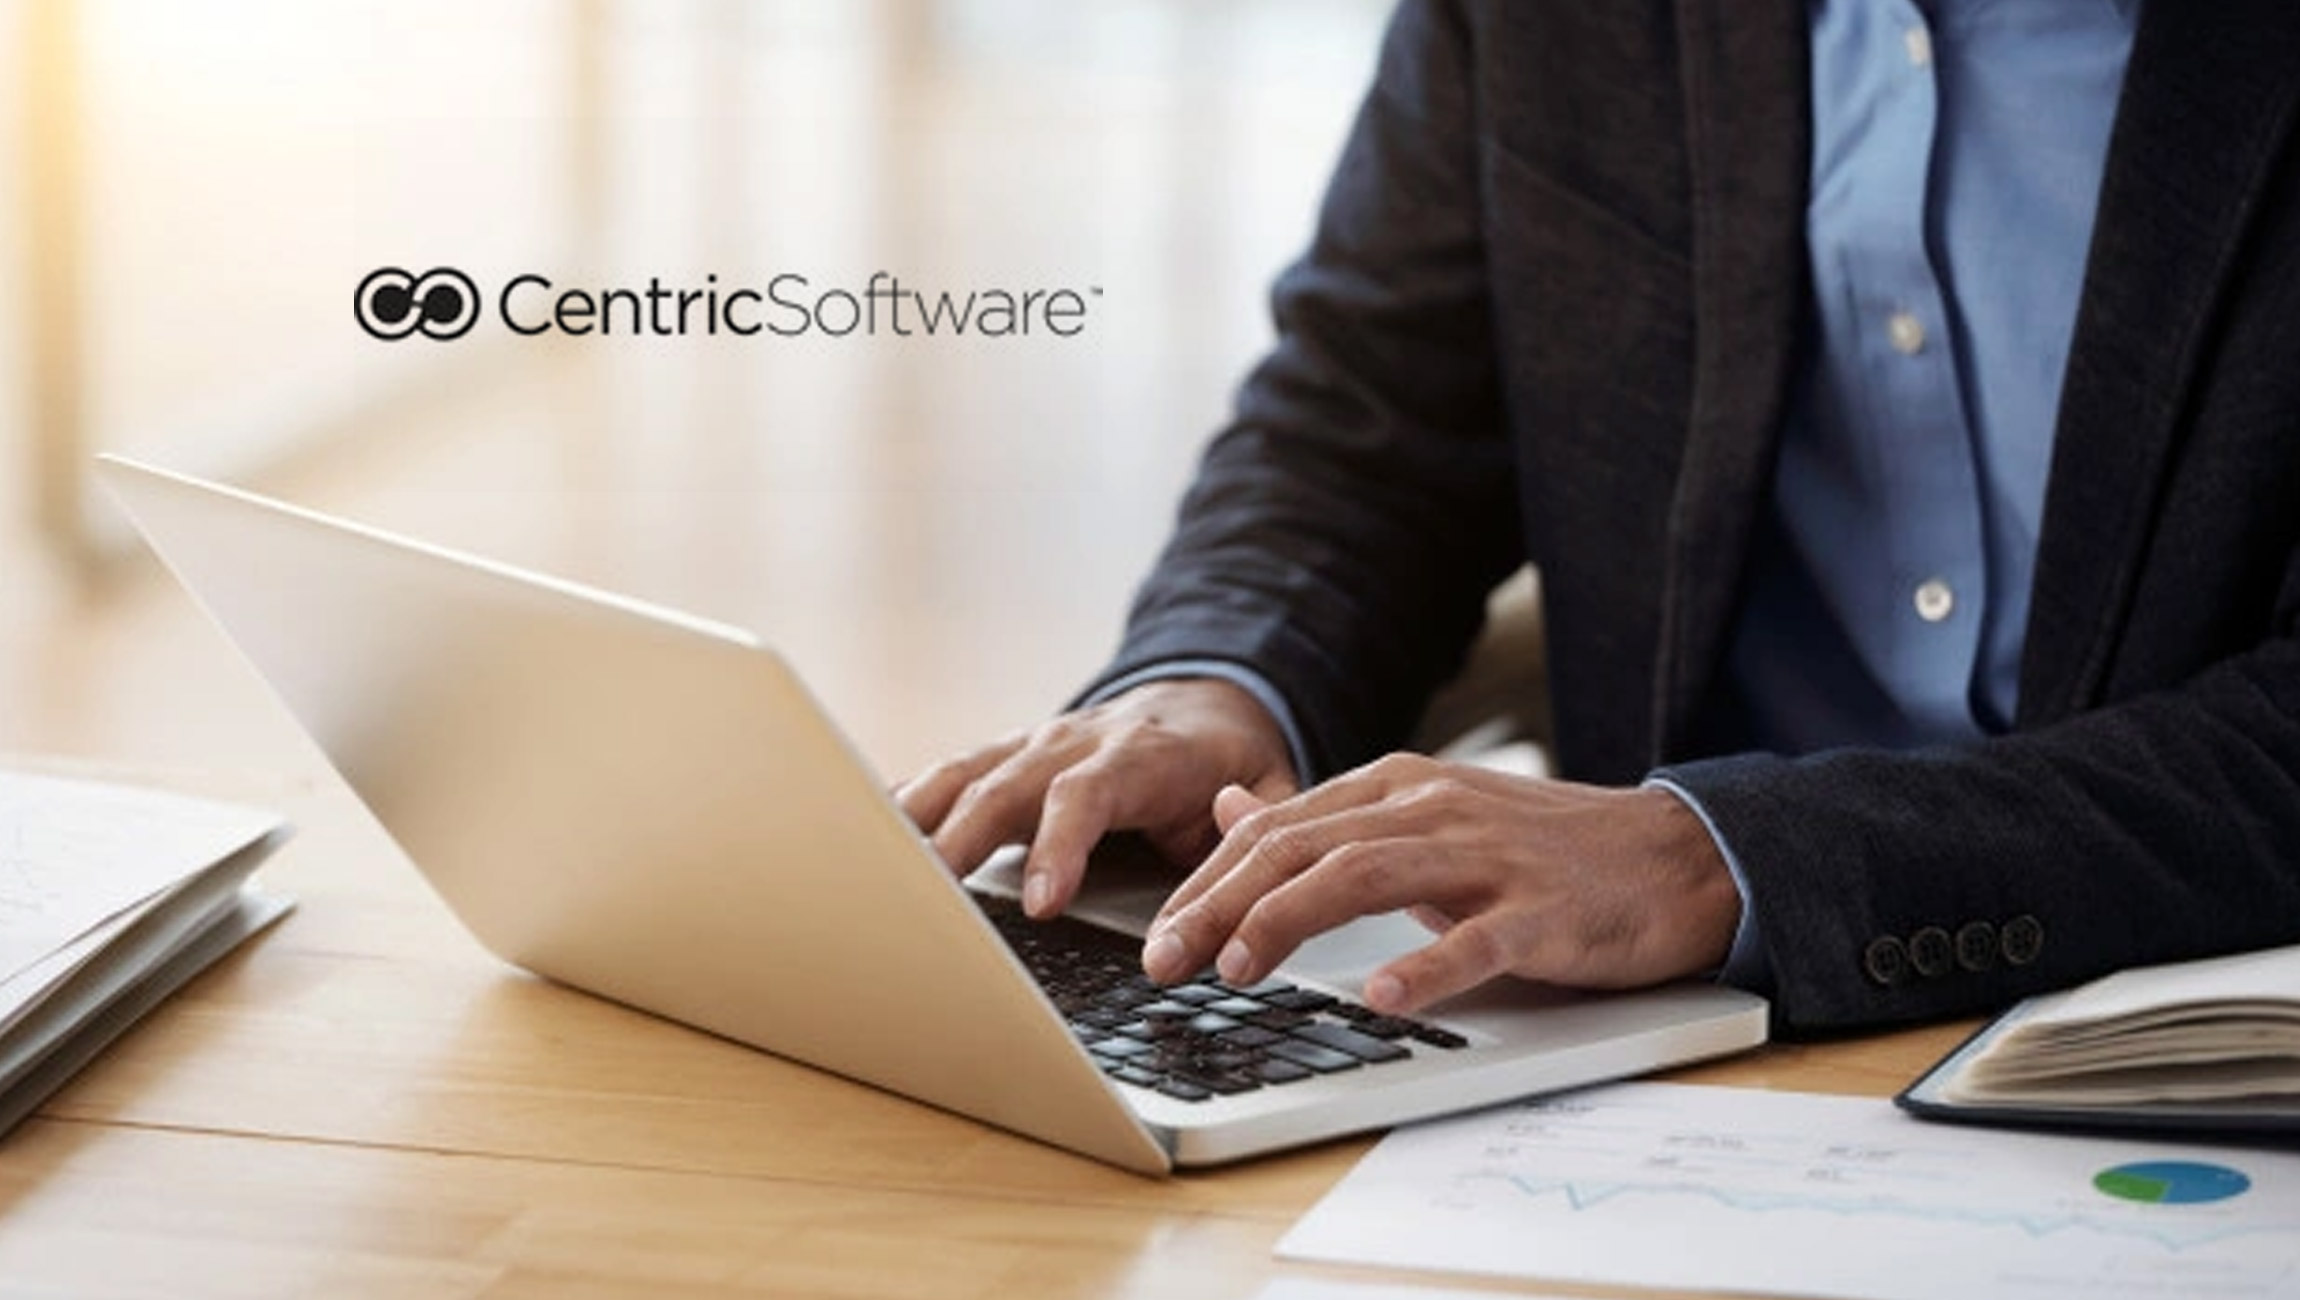 Centric Software Welcomes First Customers in India